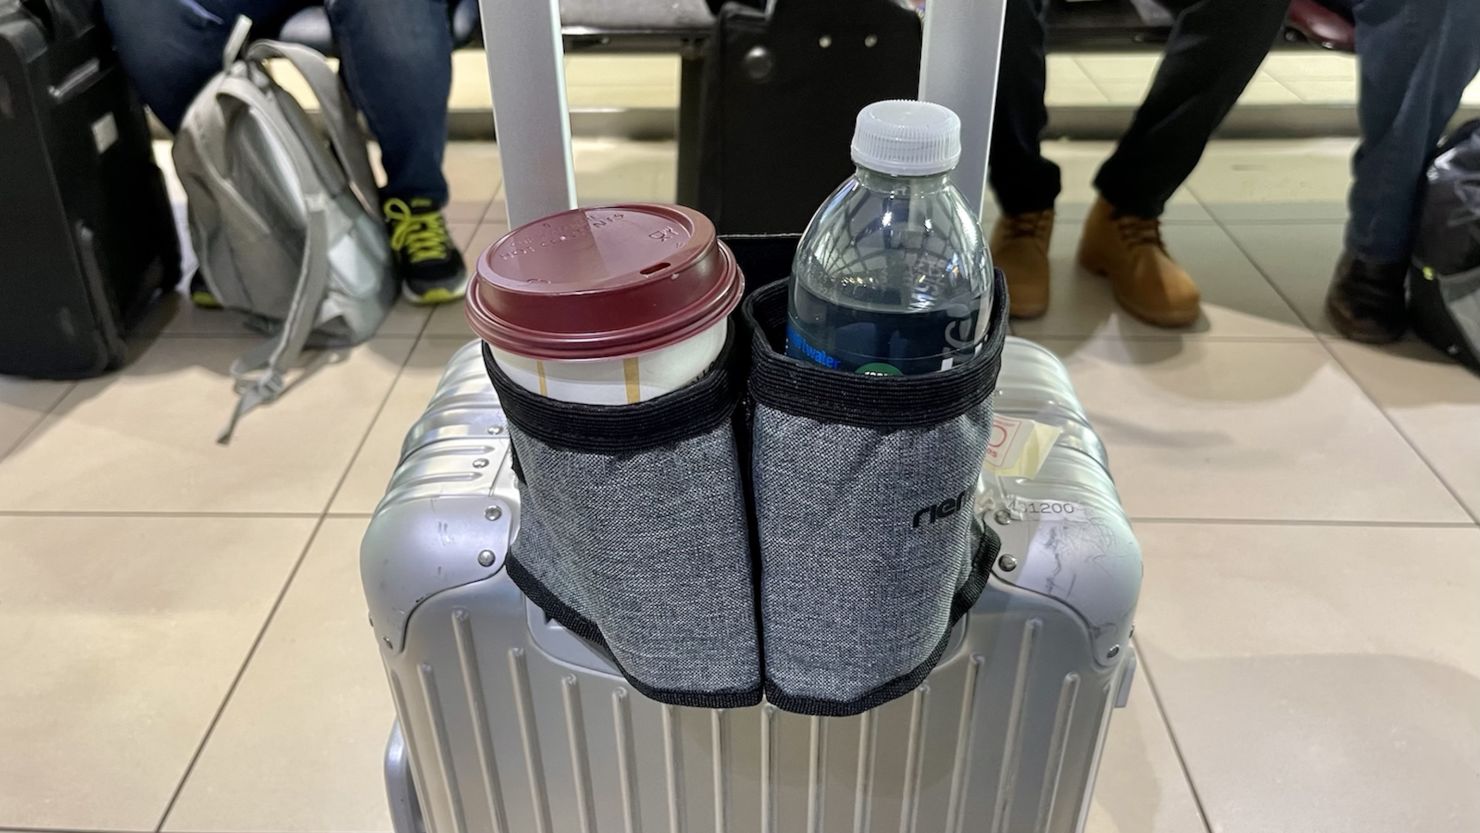 Luggage Cup Holder Perfect for Starbucks Coffee Cups, Fits All 4-Wheeled Suitcases and Made of ABS Material for Easy Cleaning, Great Travel